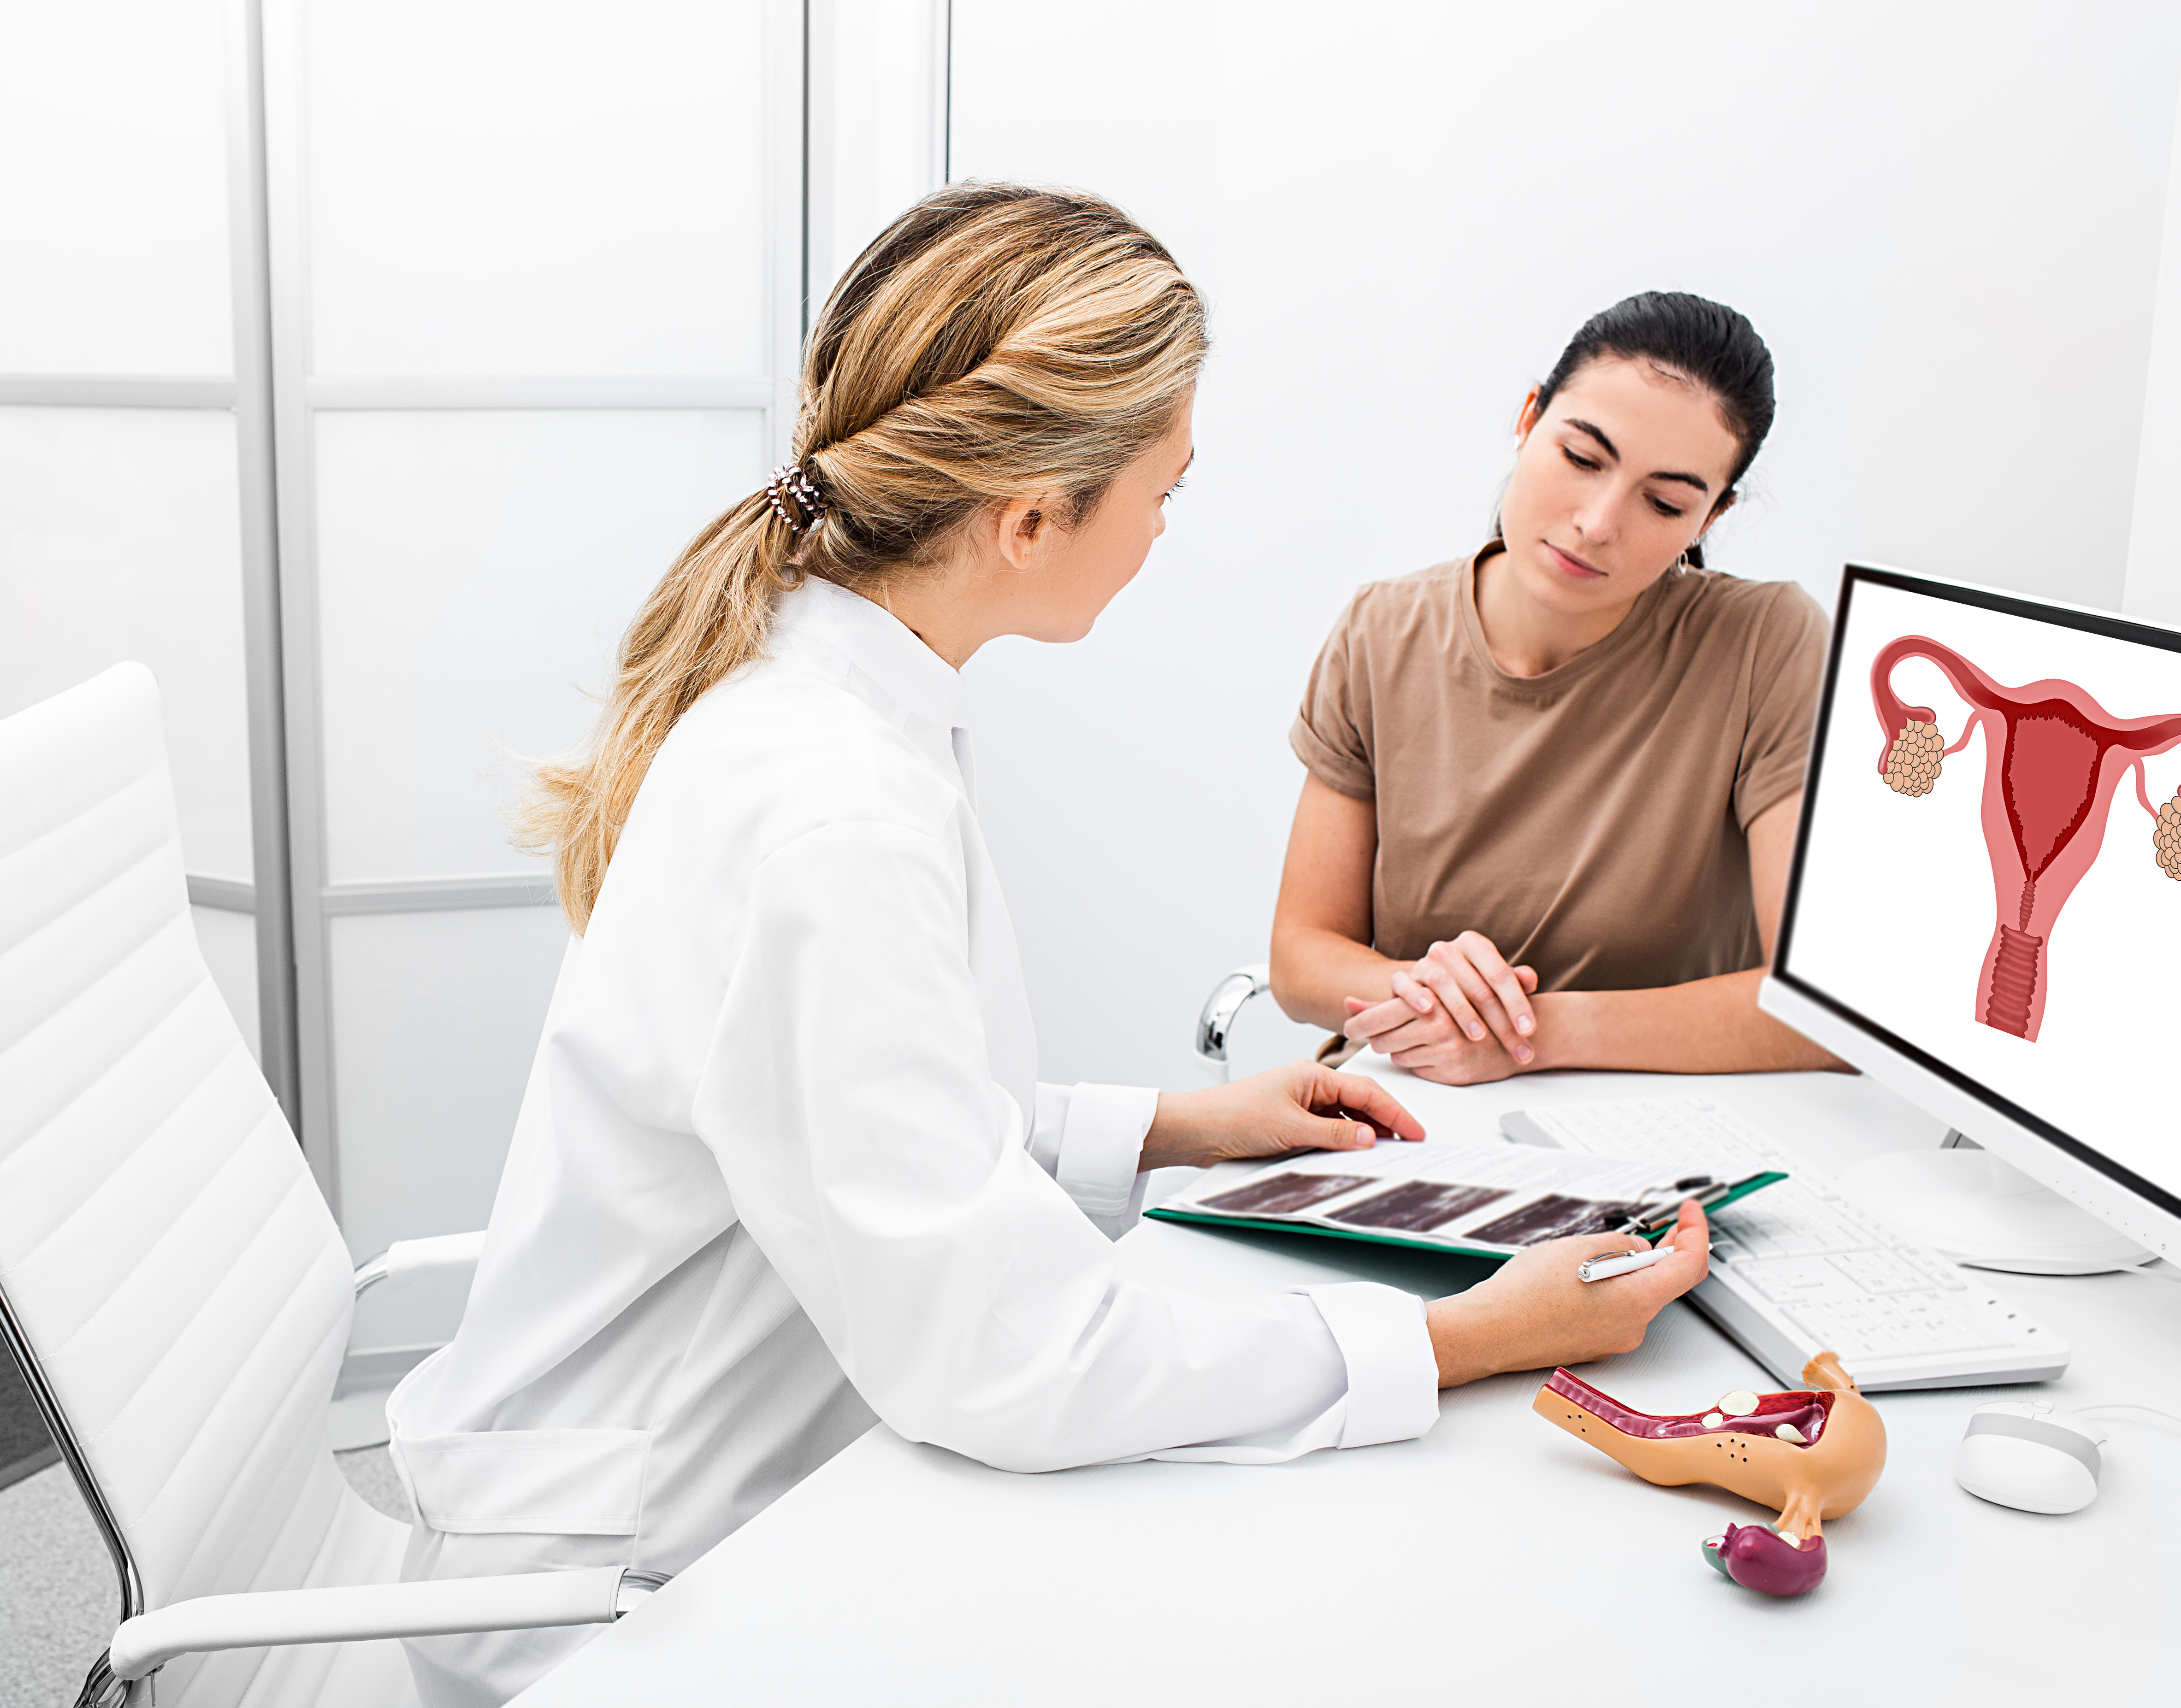 Gynecologist consultation for young woman | Source: Shutterstock